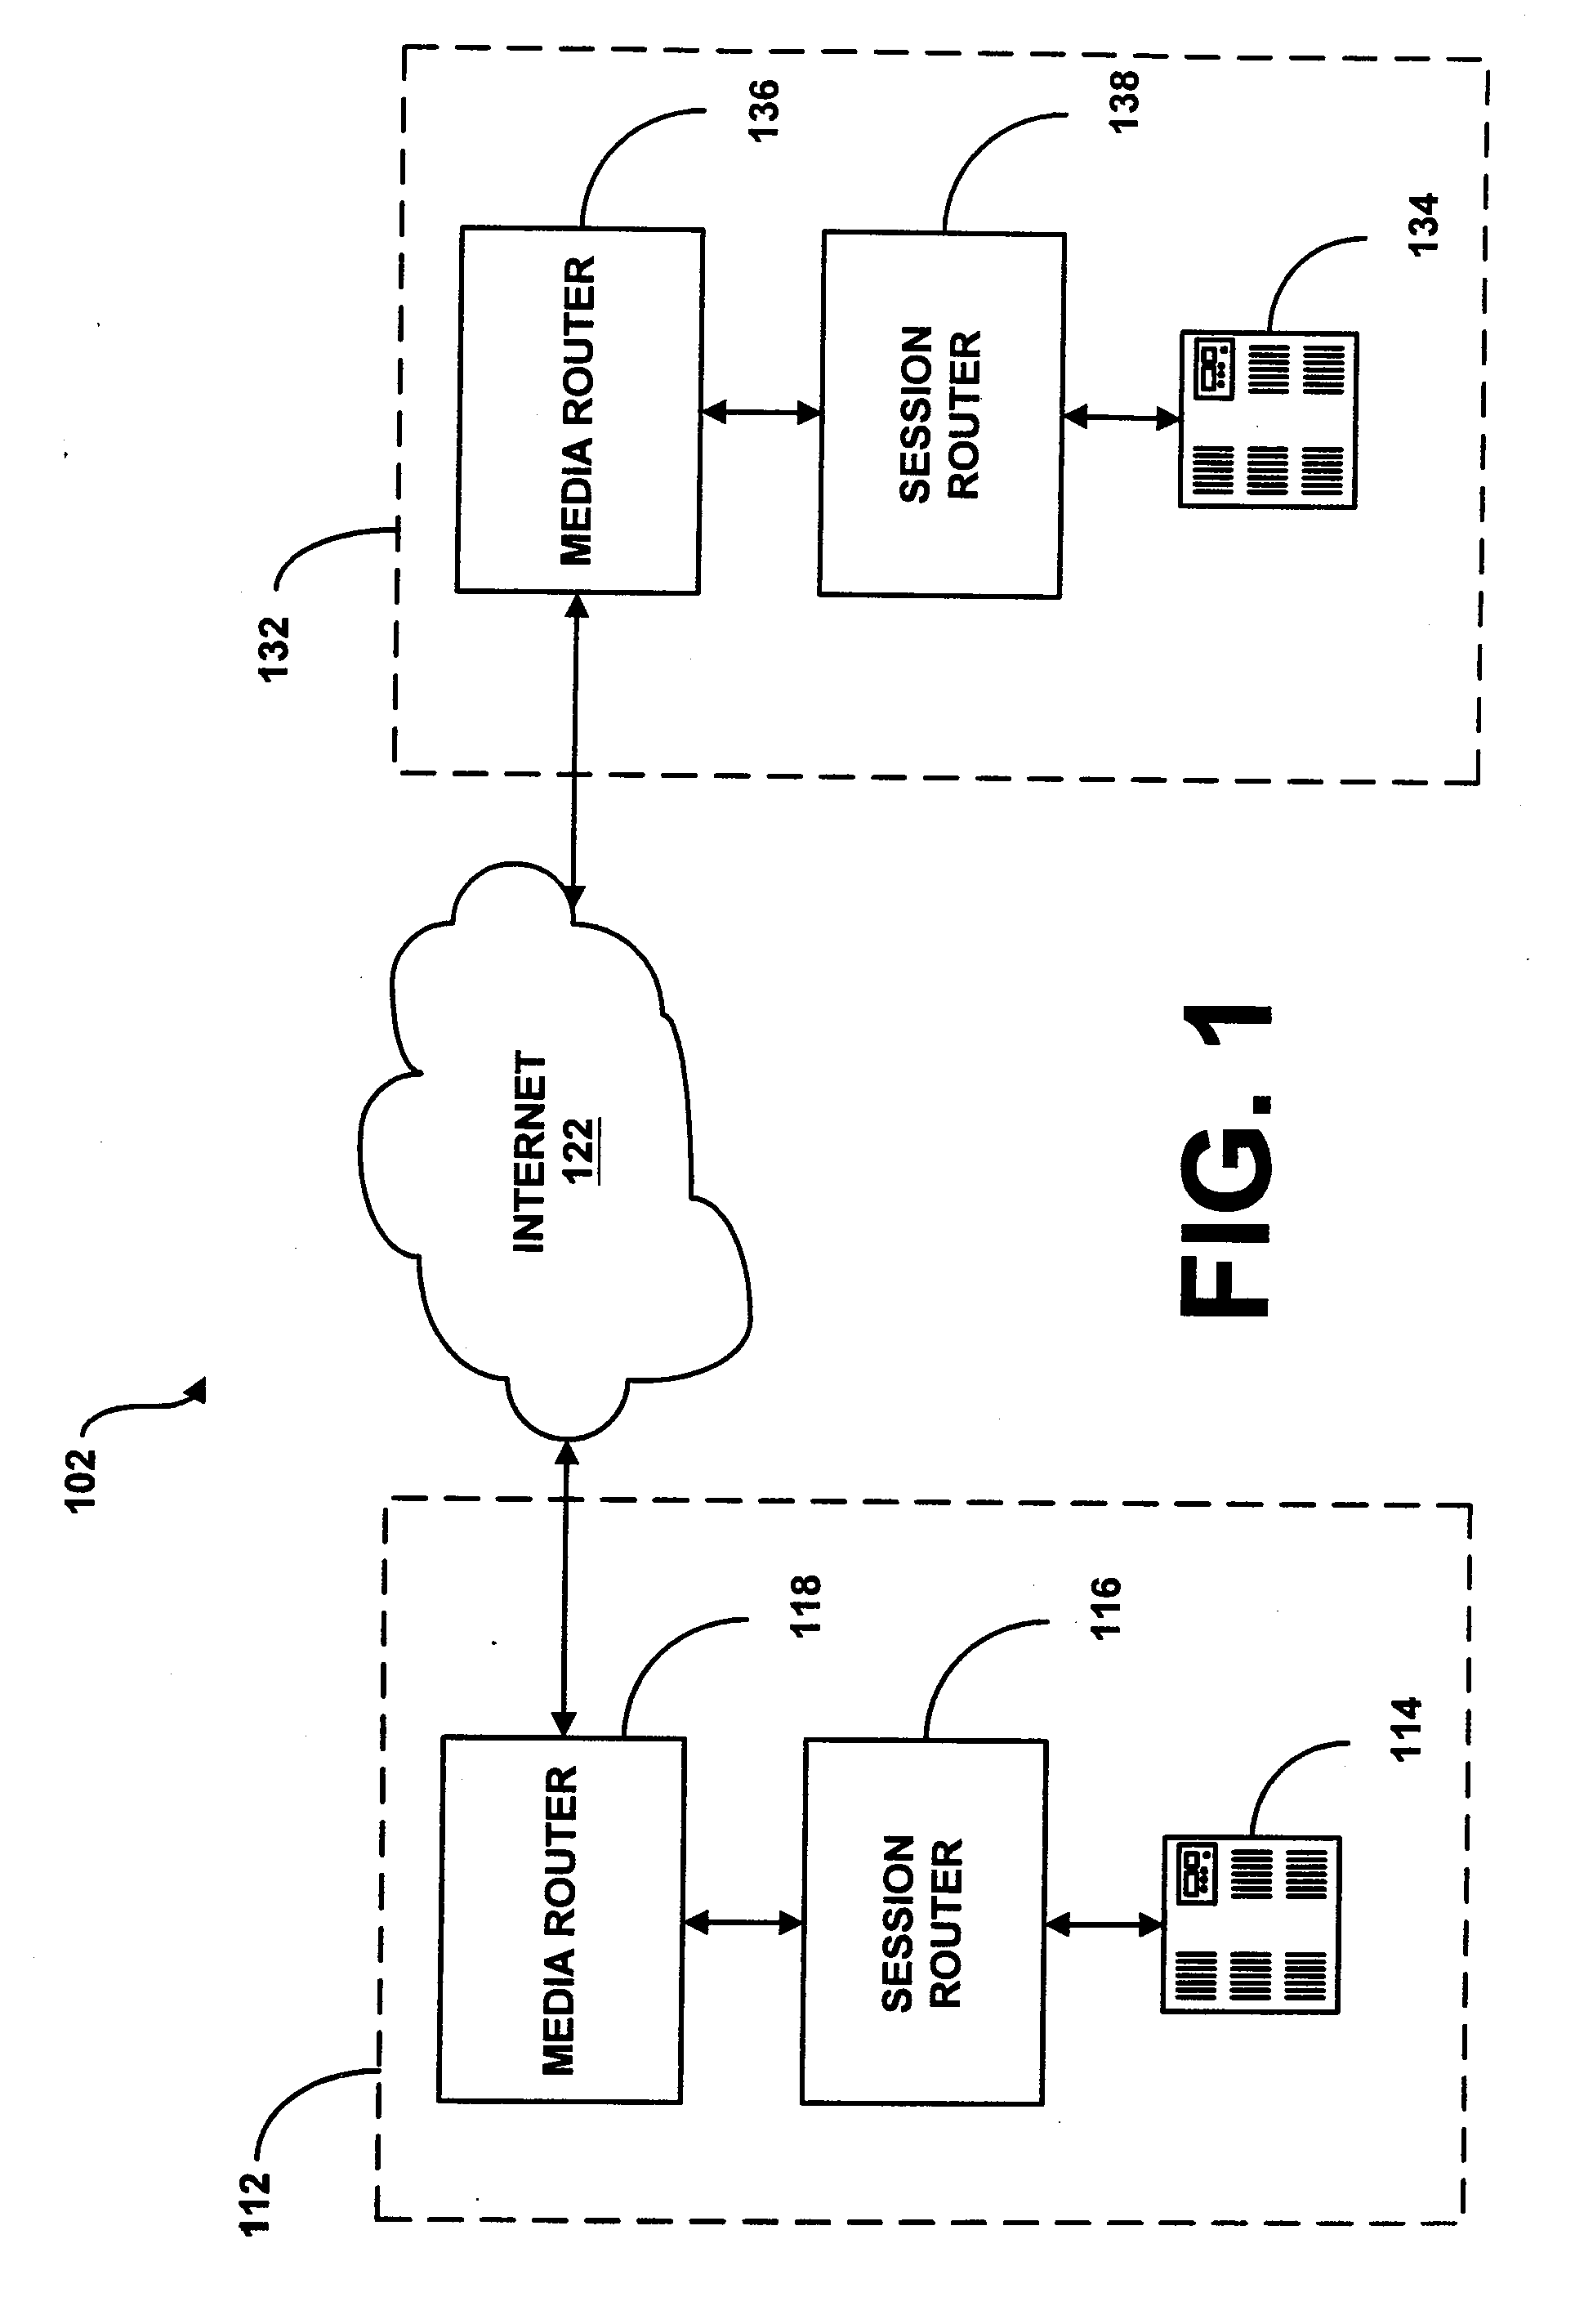 System and Method for Determining Flow Quality Statistics for Real-Time Transport Protocol Data Flows